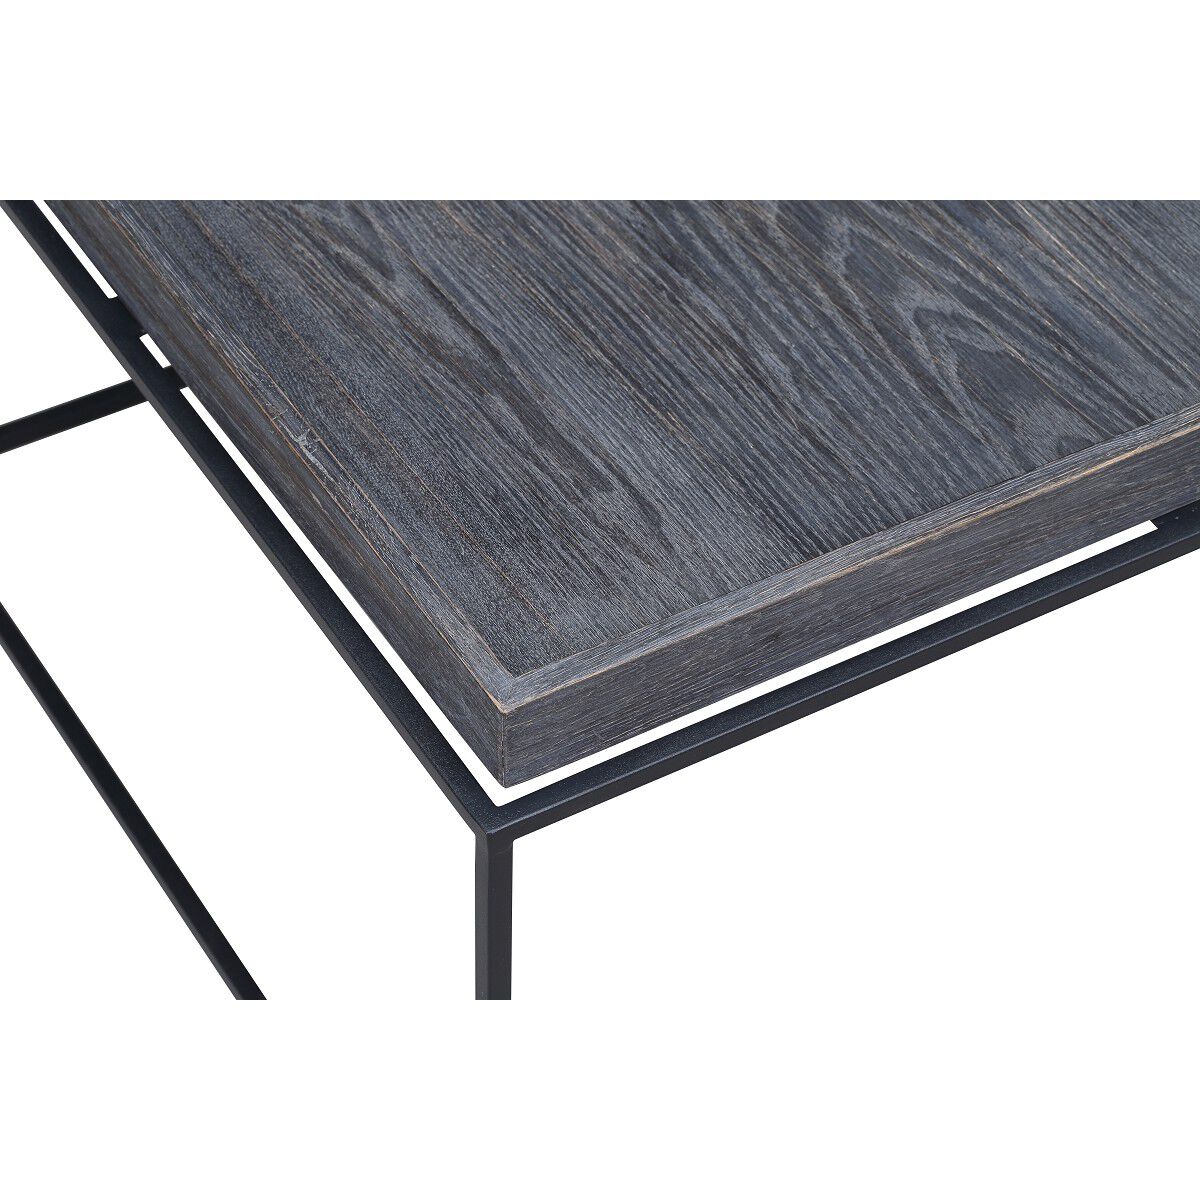 Tray Top Wooden Coffee Table with Tubular Legs, Gray and Black